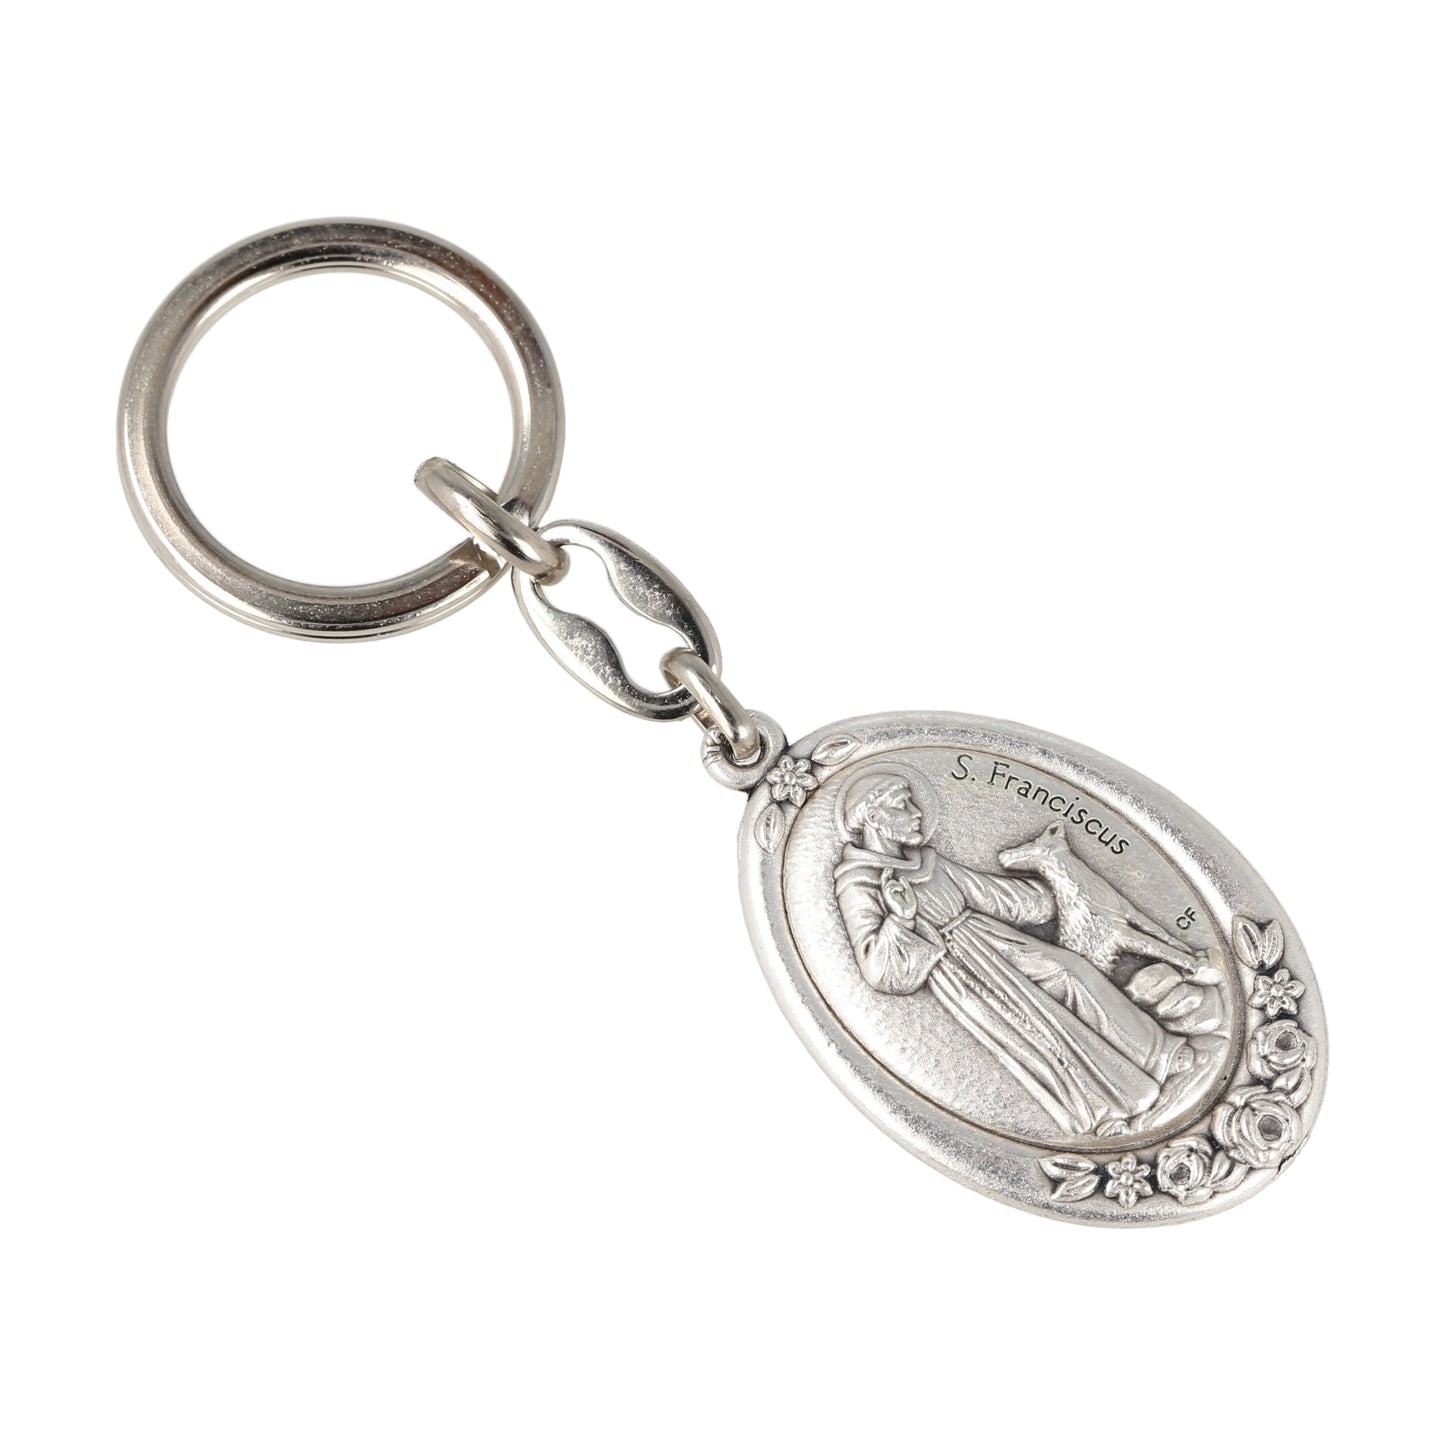 Keychain Saint Francis w/ wolf Oval Silver. With Flowers. Souvenirs from Italy